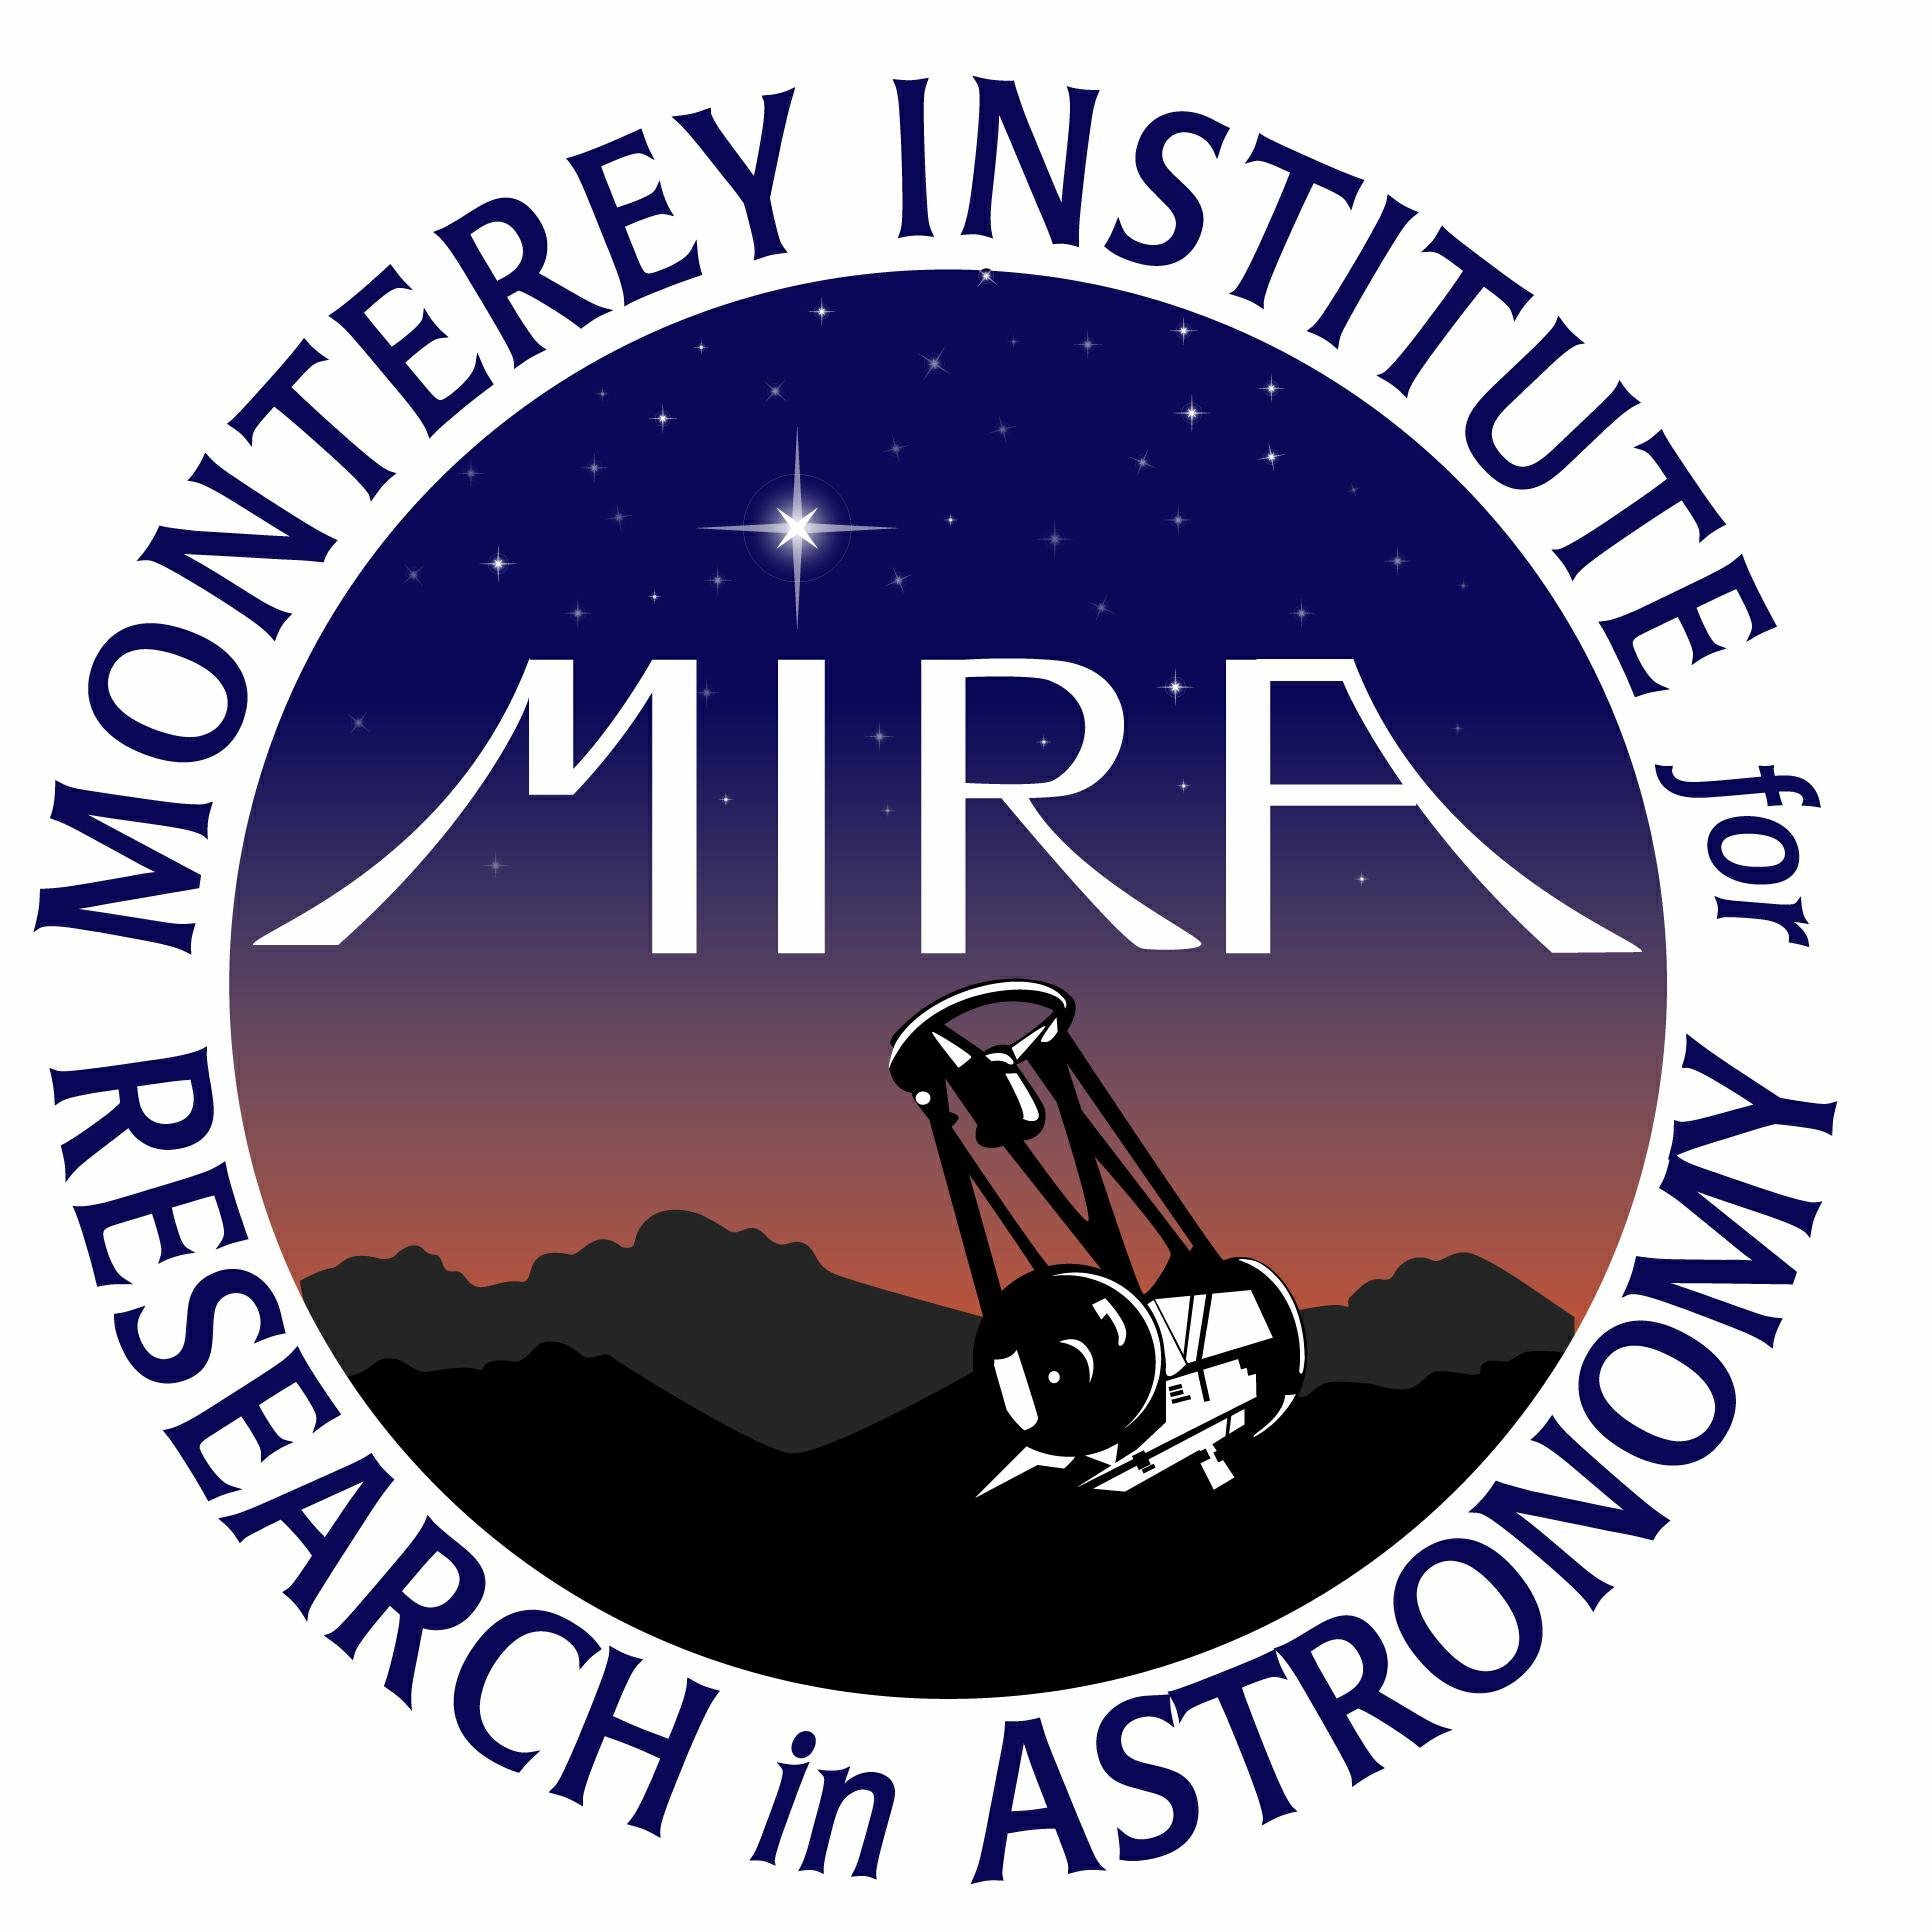 The Monterey Institute for Research in Astronomy is a non-profit astronomical observatory founded in 1972 and dedicated to research and education in astronomy.